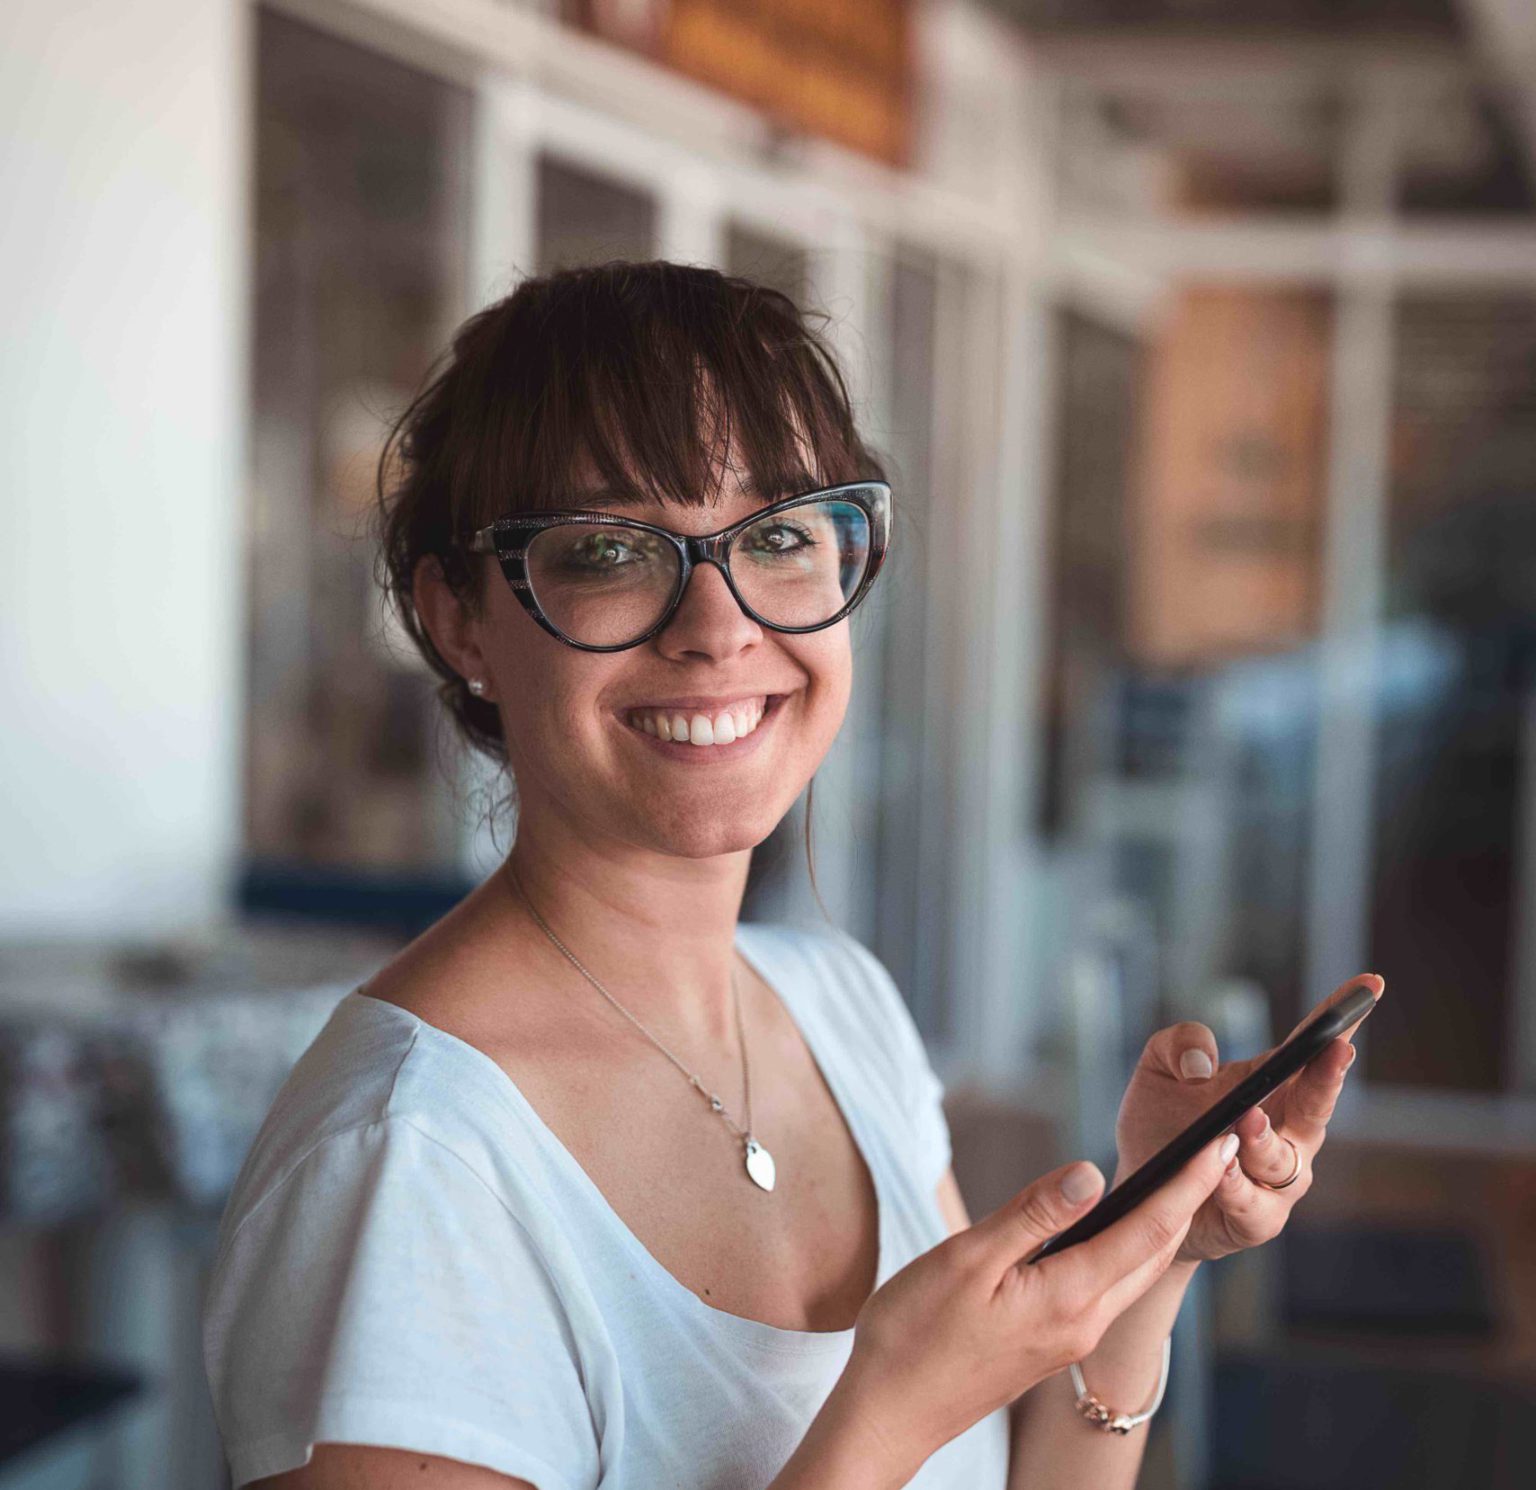 Photo of a woman smiling at the camera and holding a smart phone